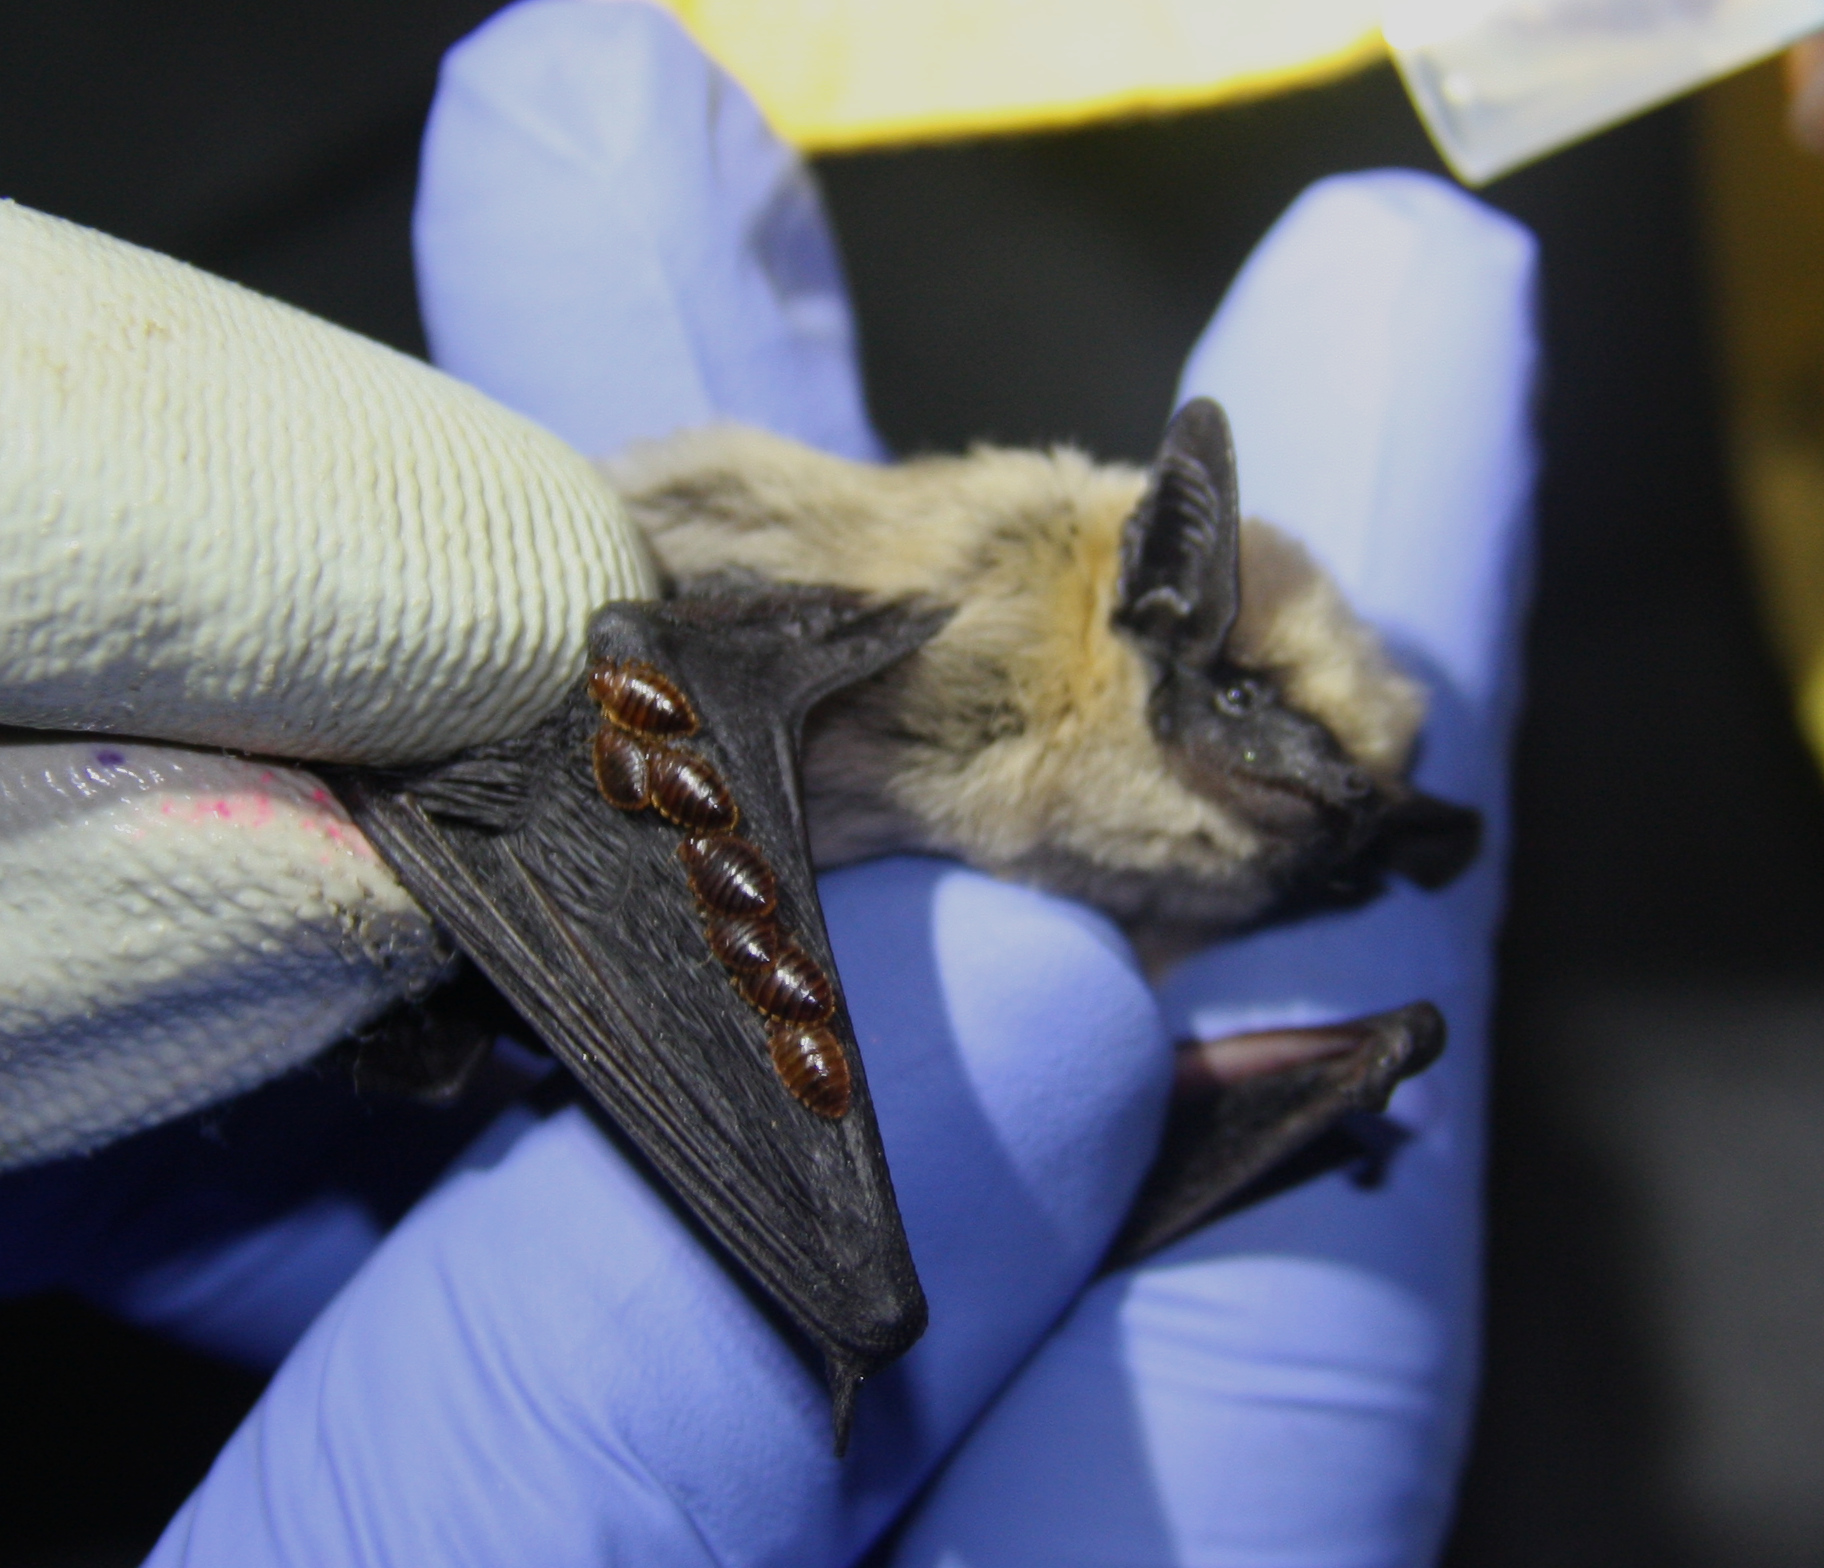 University of Leeds researchers discover novel cryptic ectoparasites with implications for disease monitoring and bat conservation